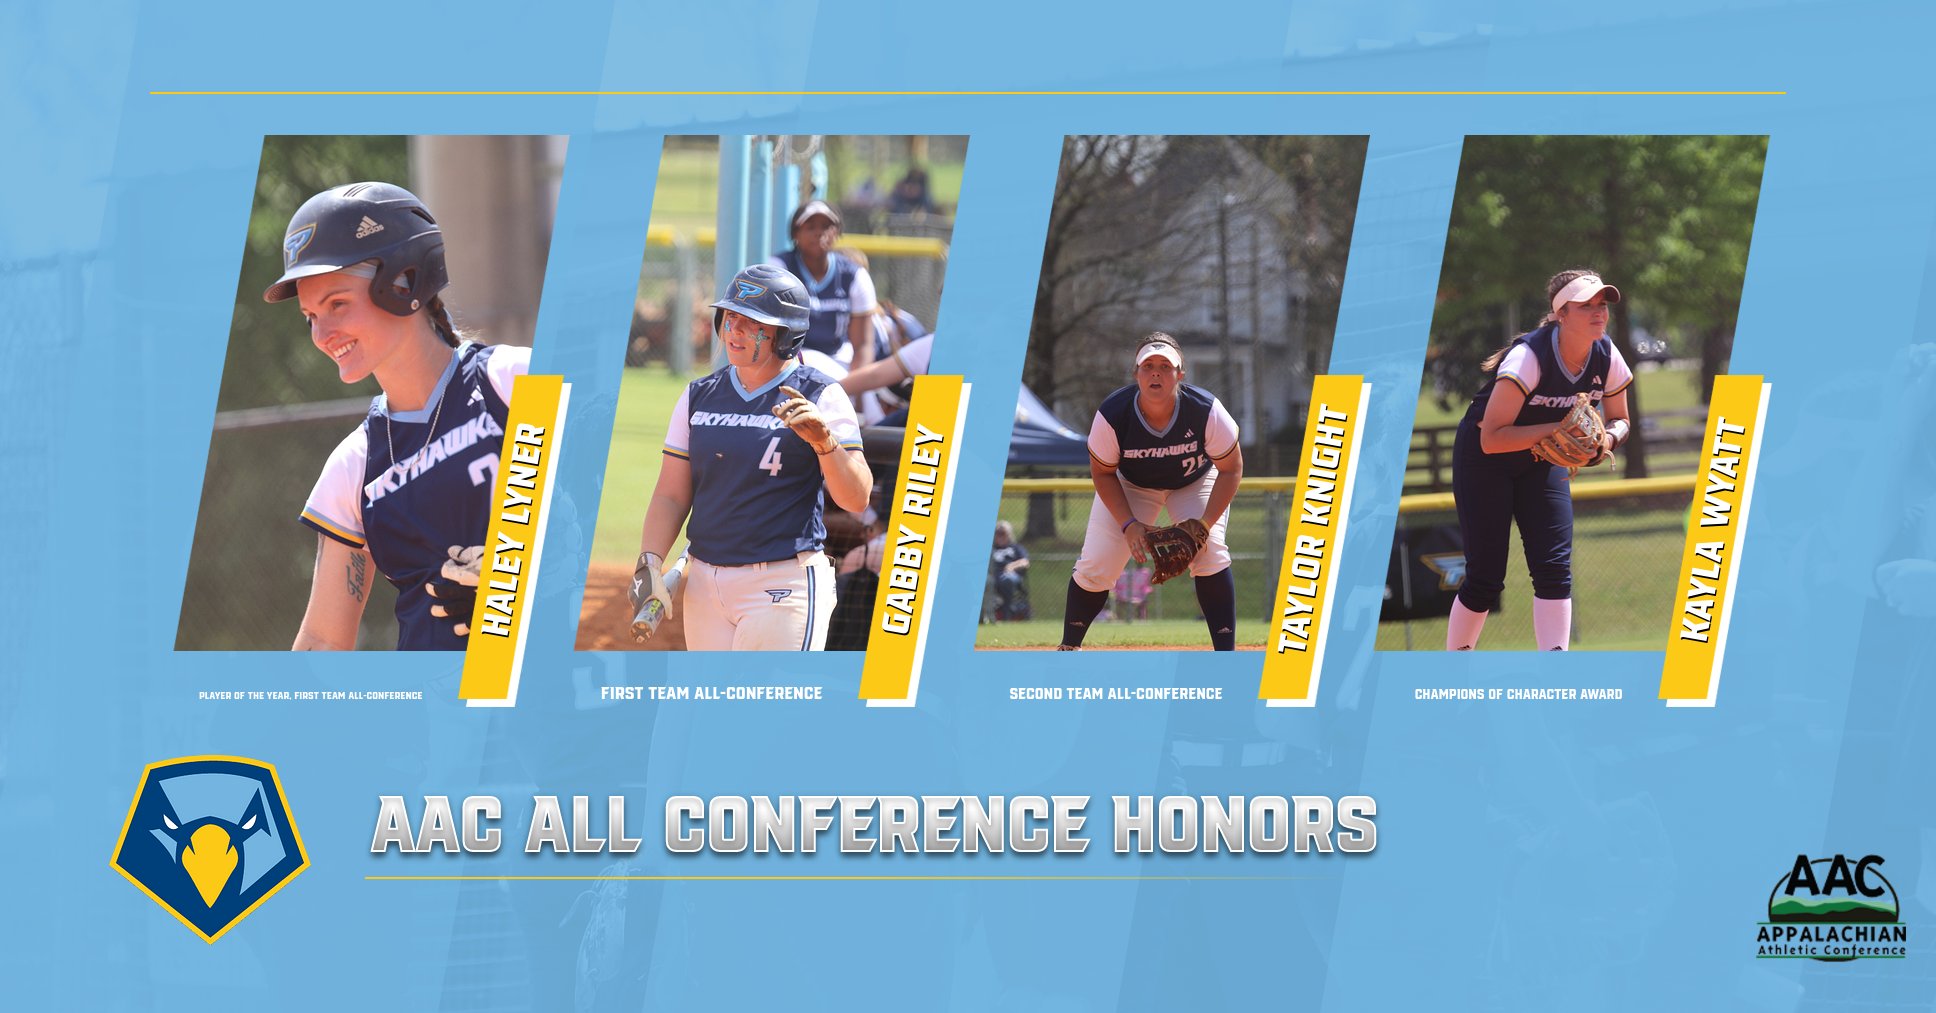 Softball’s hard work rewarded with All-Conference honors